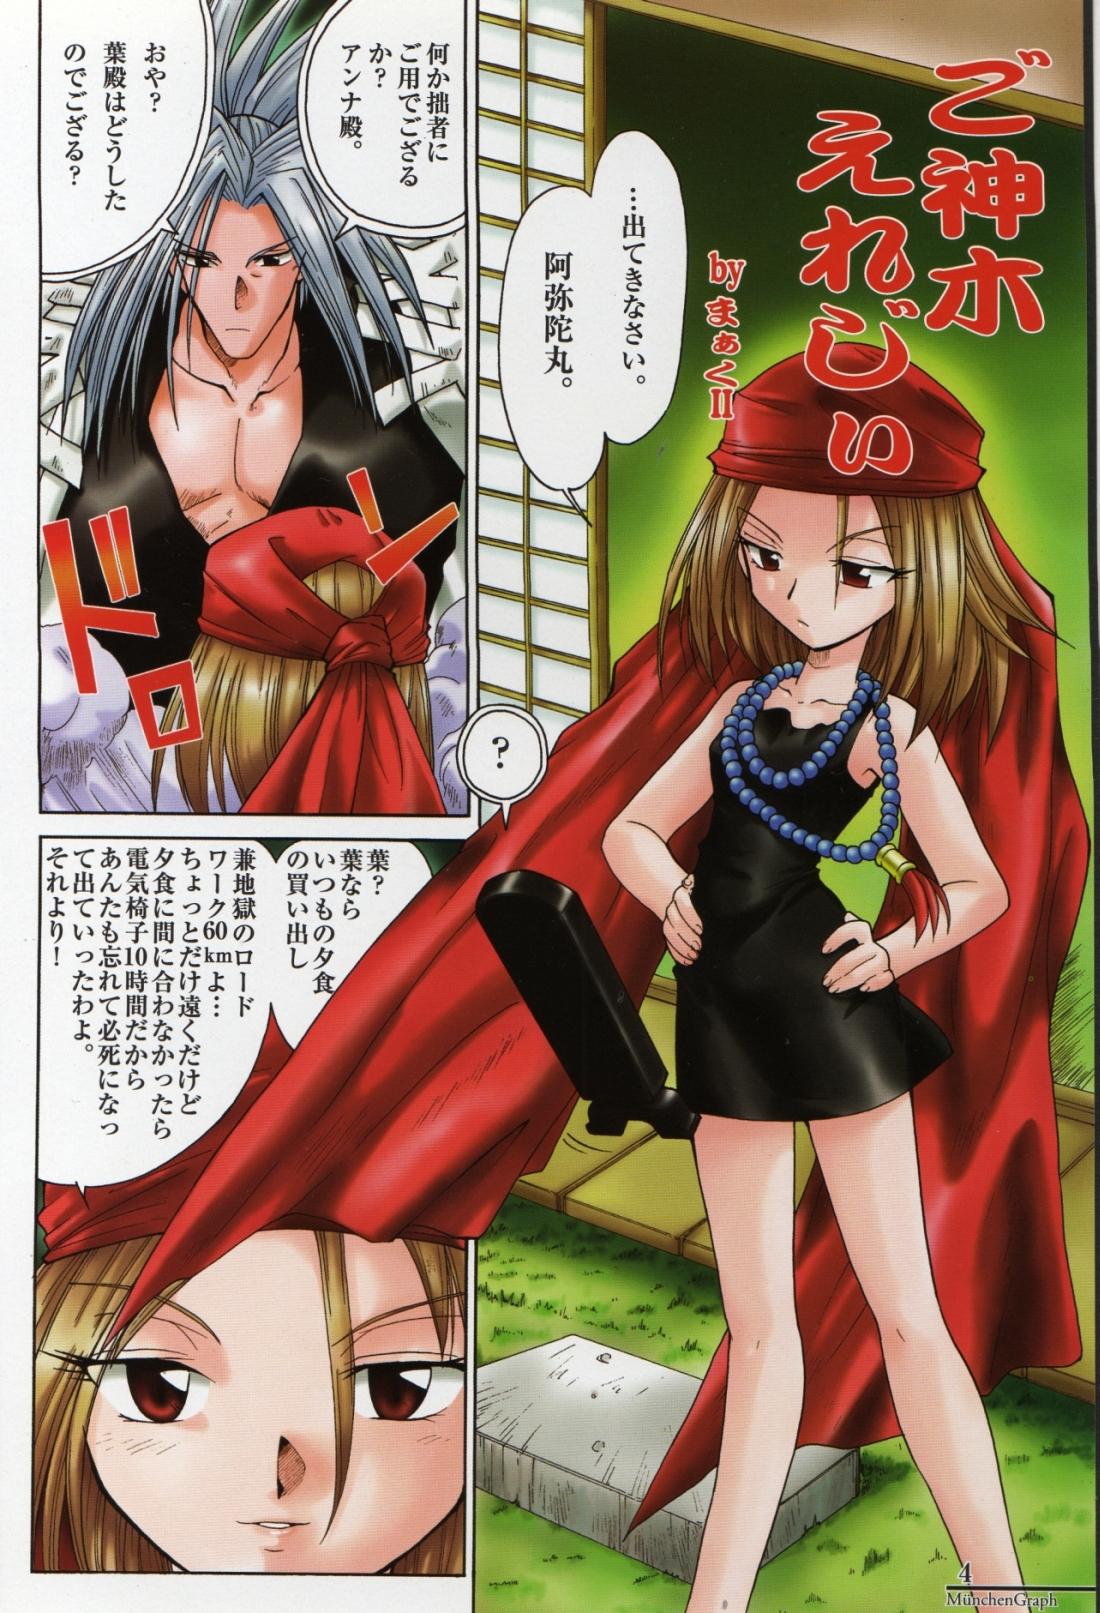 Cheating Munchen Graph Volume 10 - Shaman king Cheating Wife - Page 4